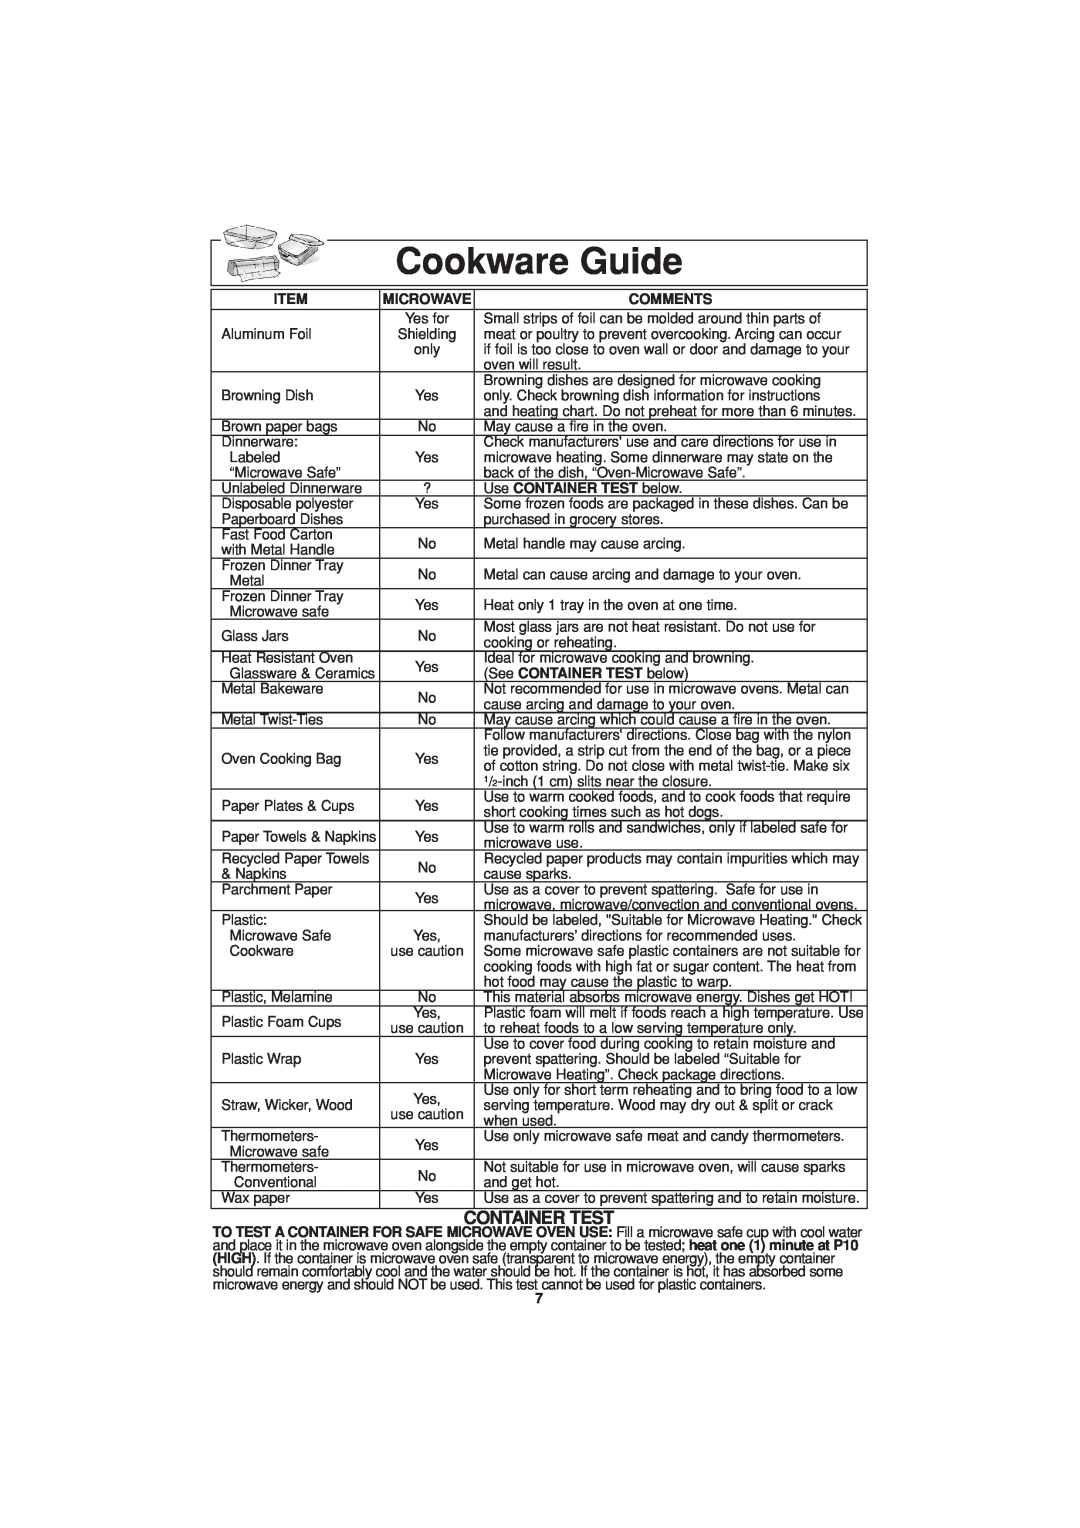 Panasonic NN-H614, NN-H604, NN-H504 important safety instructions Cookware Guide, Container Test 